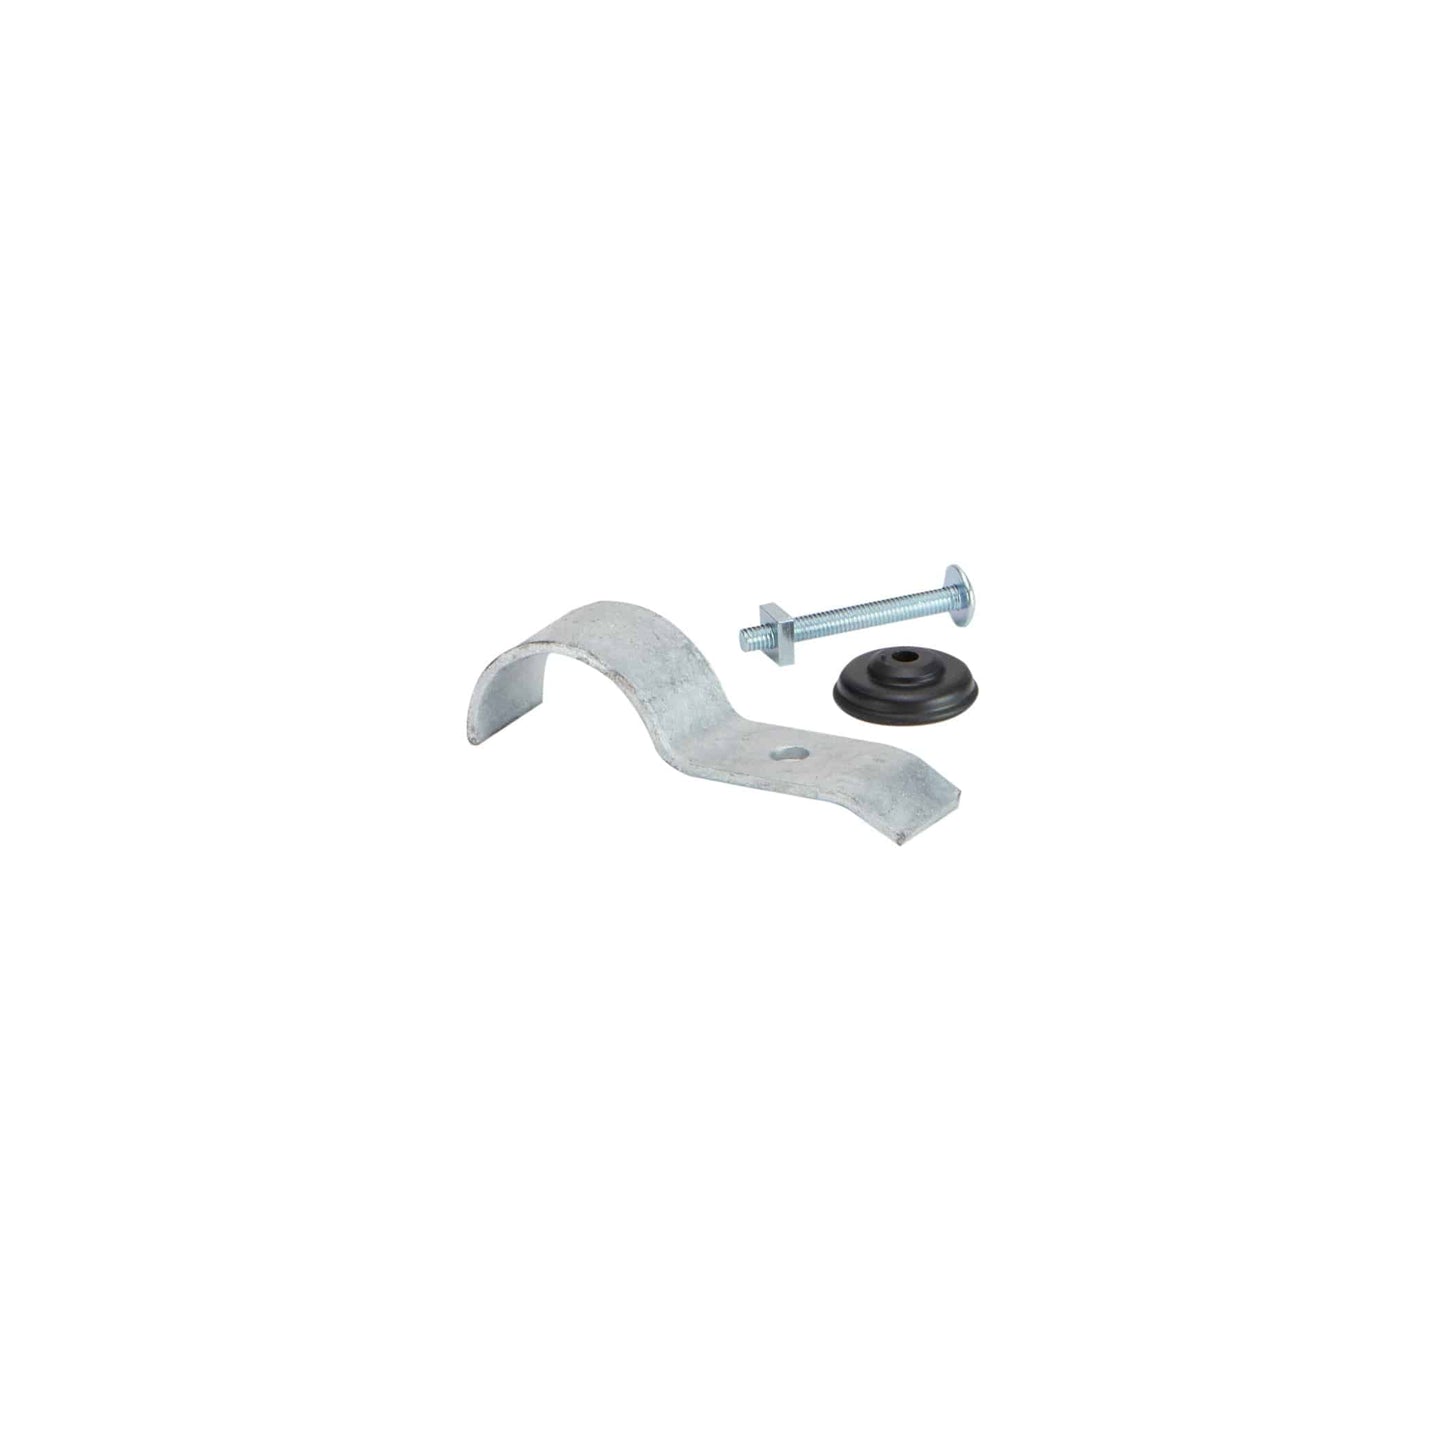 Sheeting Clip; Size: 1-1/4 in ID/1.66 in OD Pipe - Kee Safety